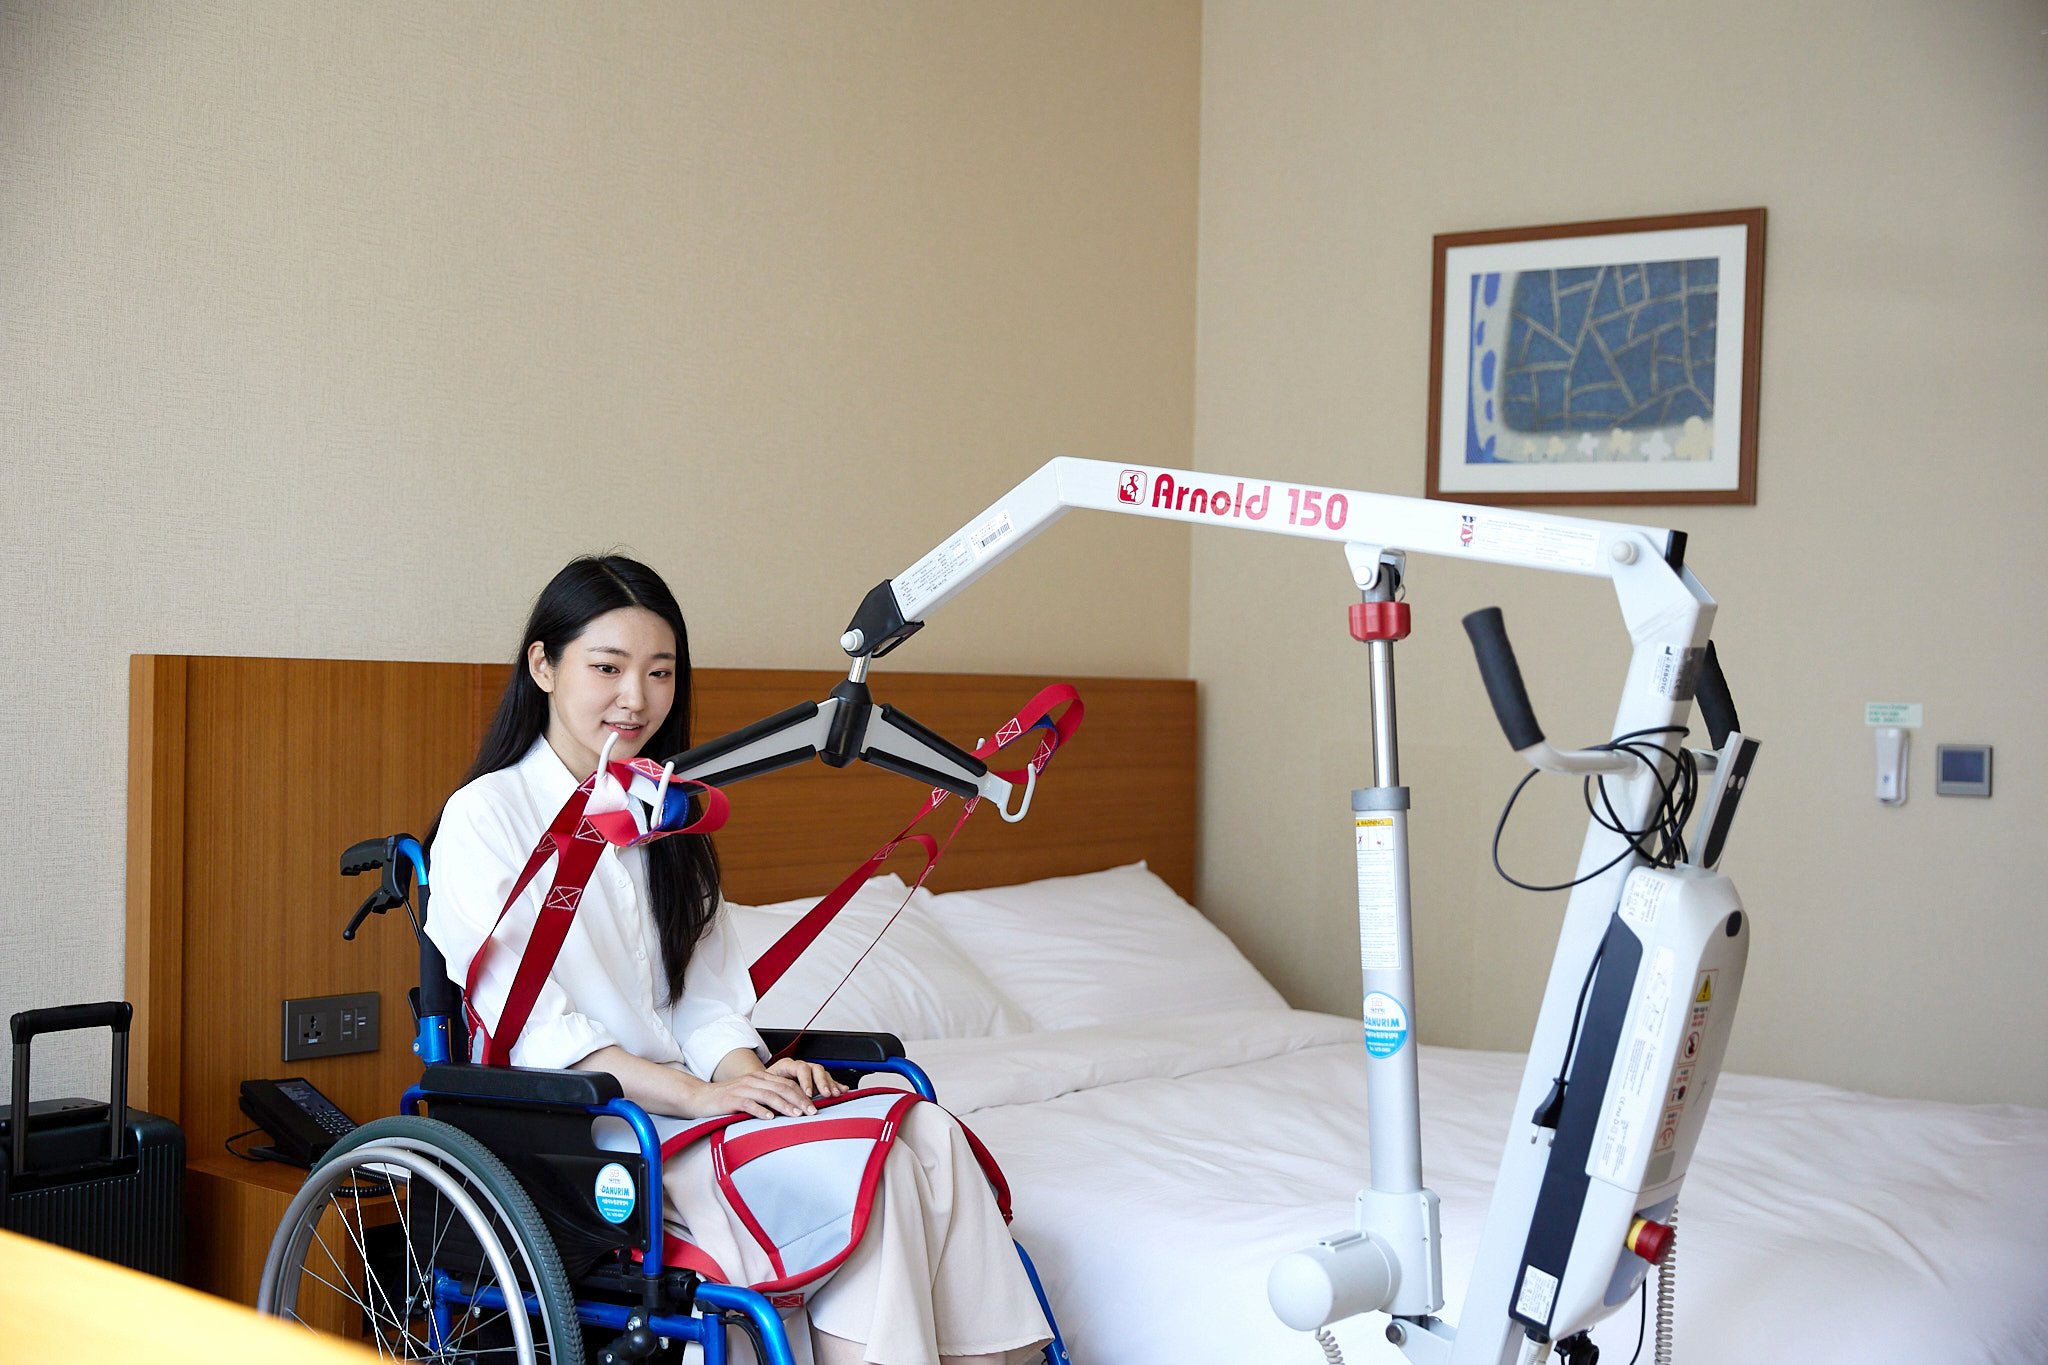 [SCB NEWS] Easy Access for All Seoul Visitors: STO Offers Free Airport Pick-up Service and Travel Assistive Device Rental